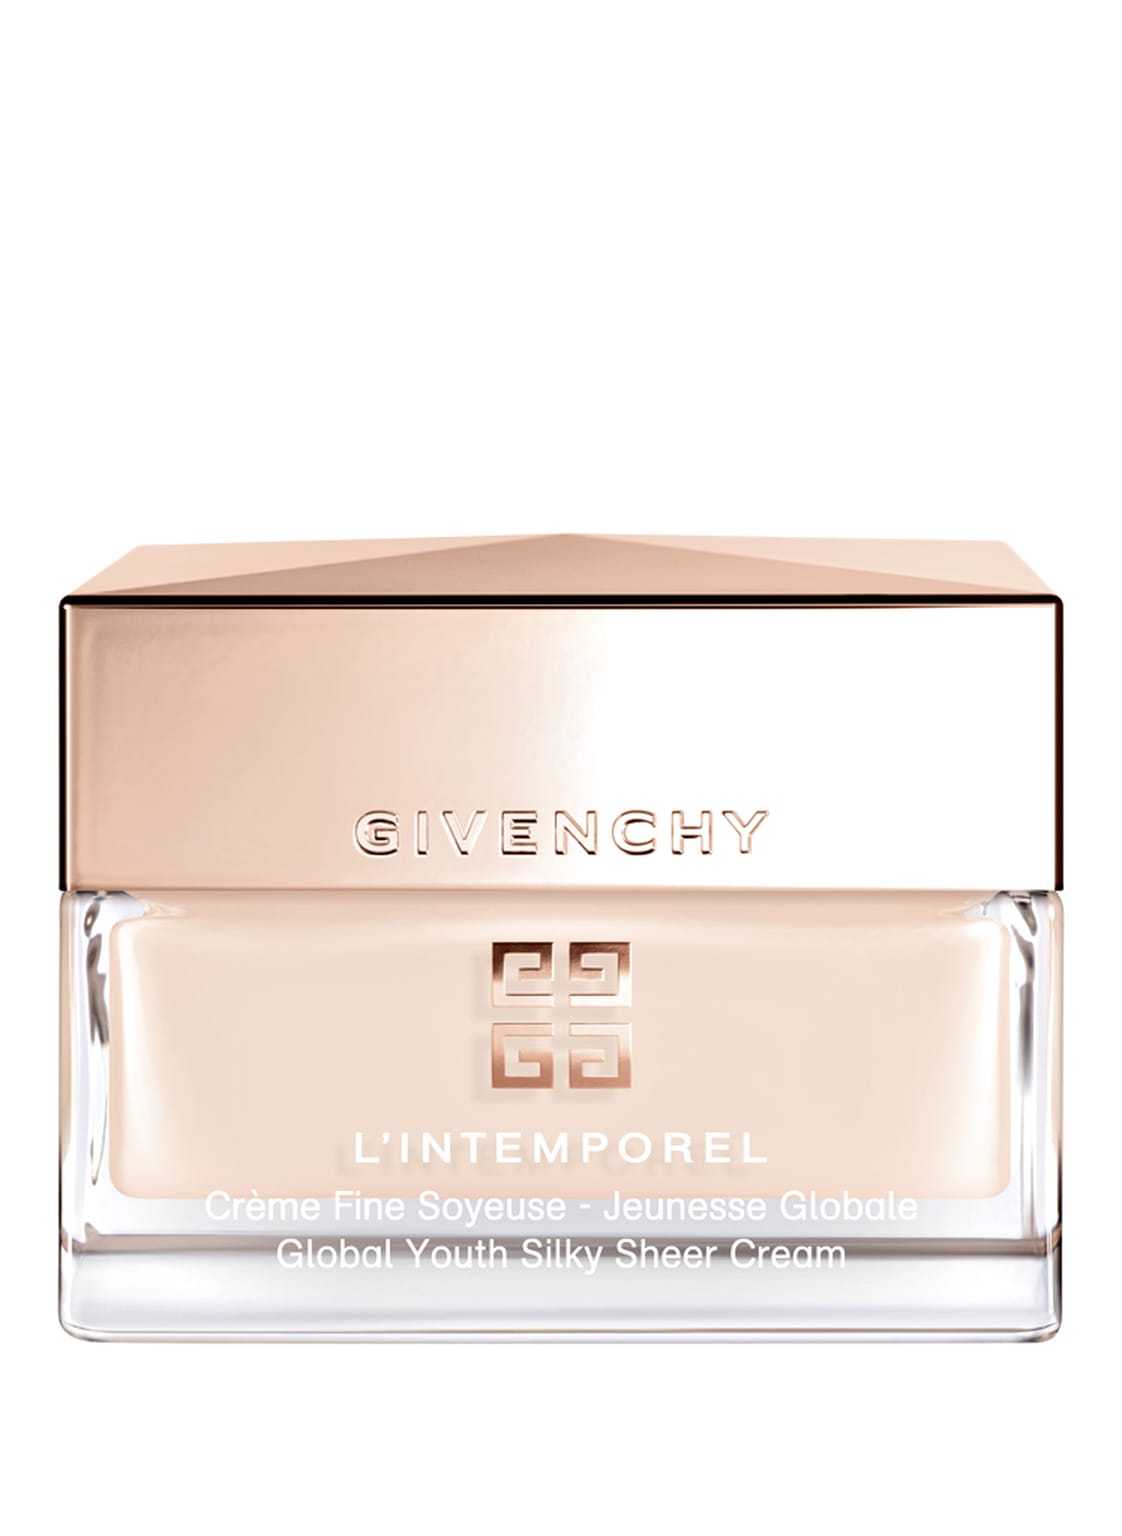 Givenchy Beauty L'intemporel Global Youth Silky Sheer Cream 50 ml von GIVENCHY BEAUTY